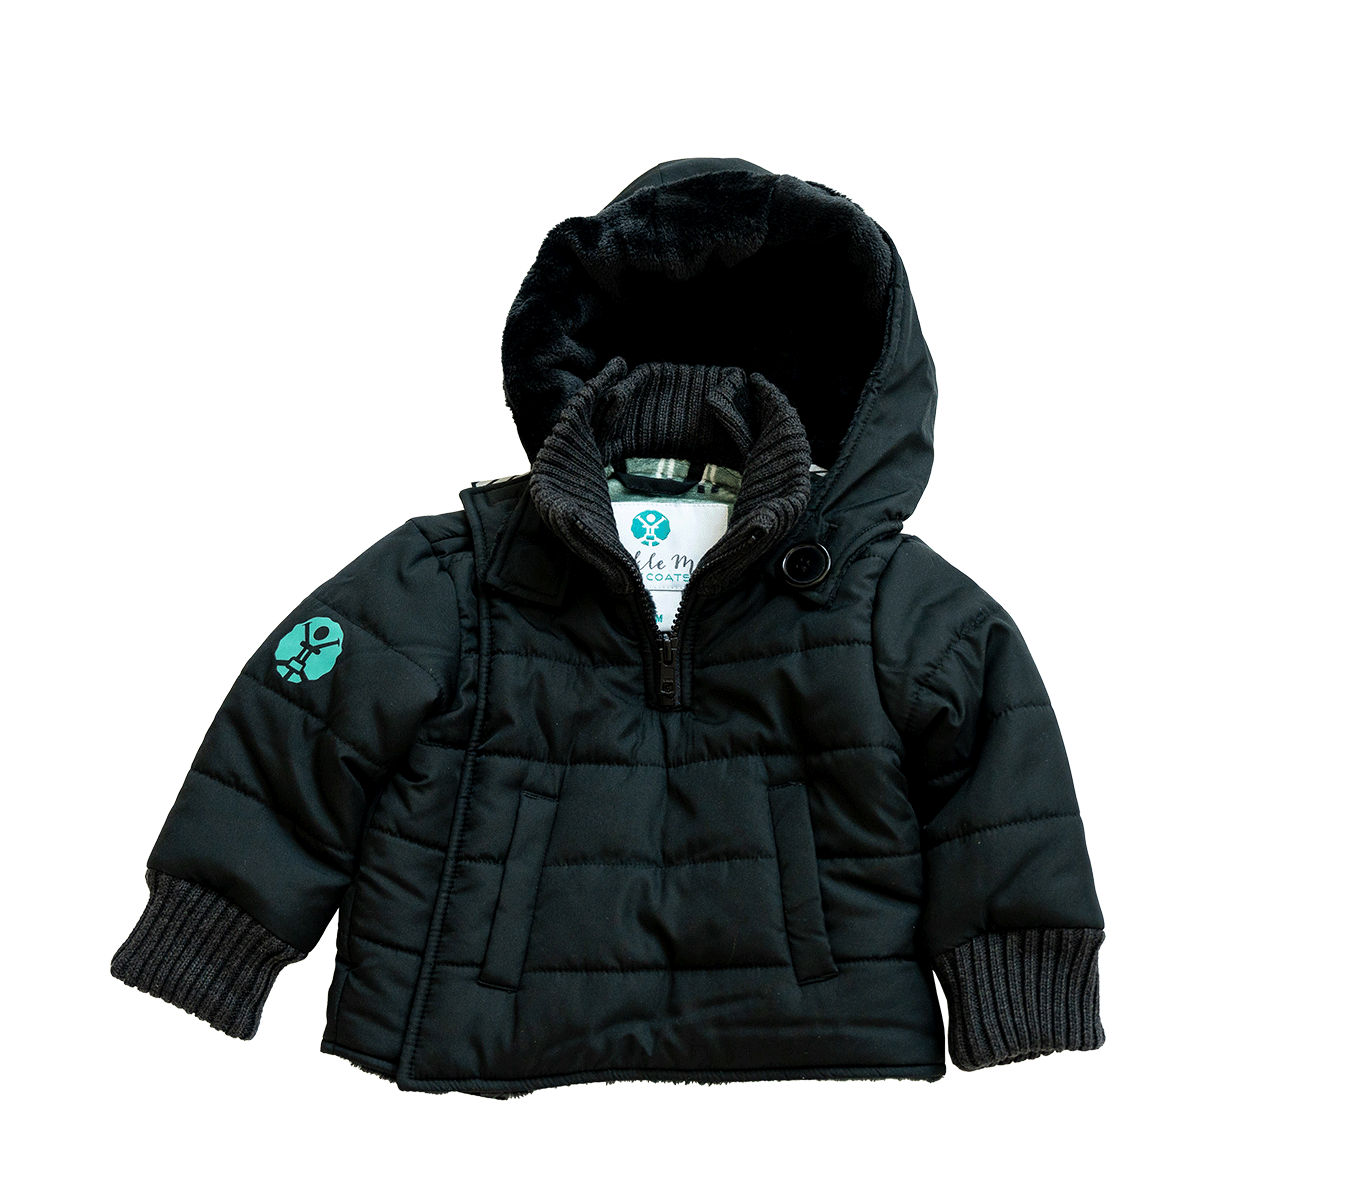 Hurrycane | Toasty Buckle Me Baby Car Seat Coats - 6 by Buckle Me Baby Coats